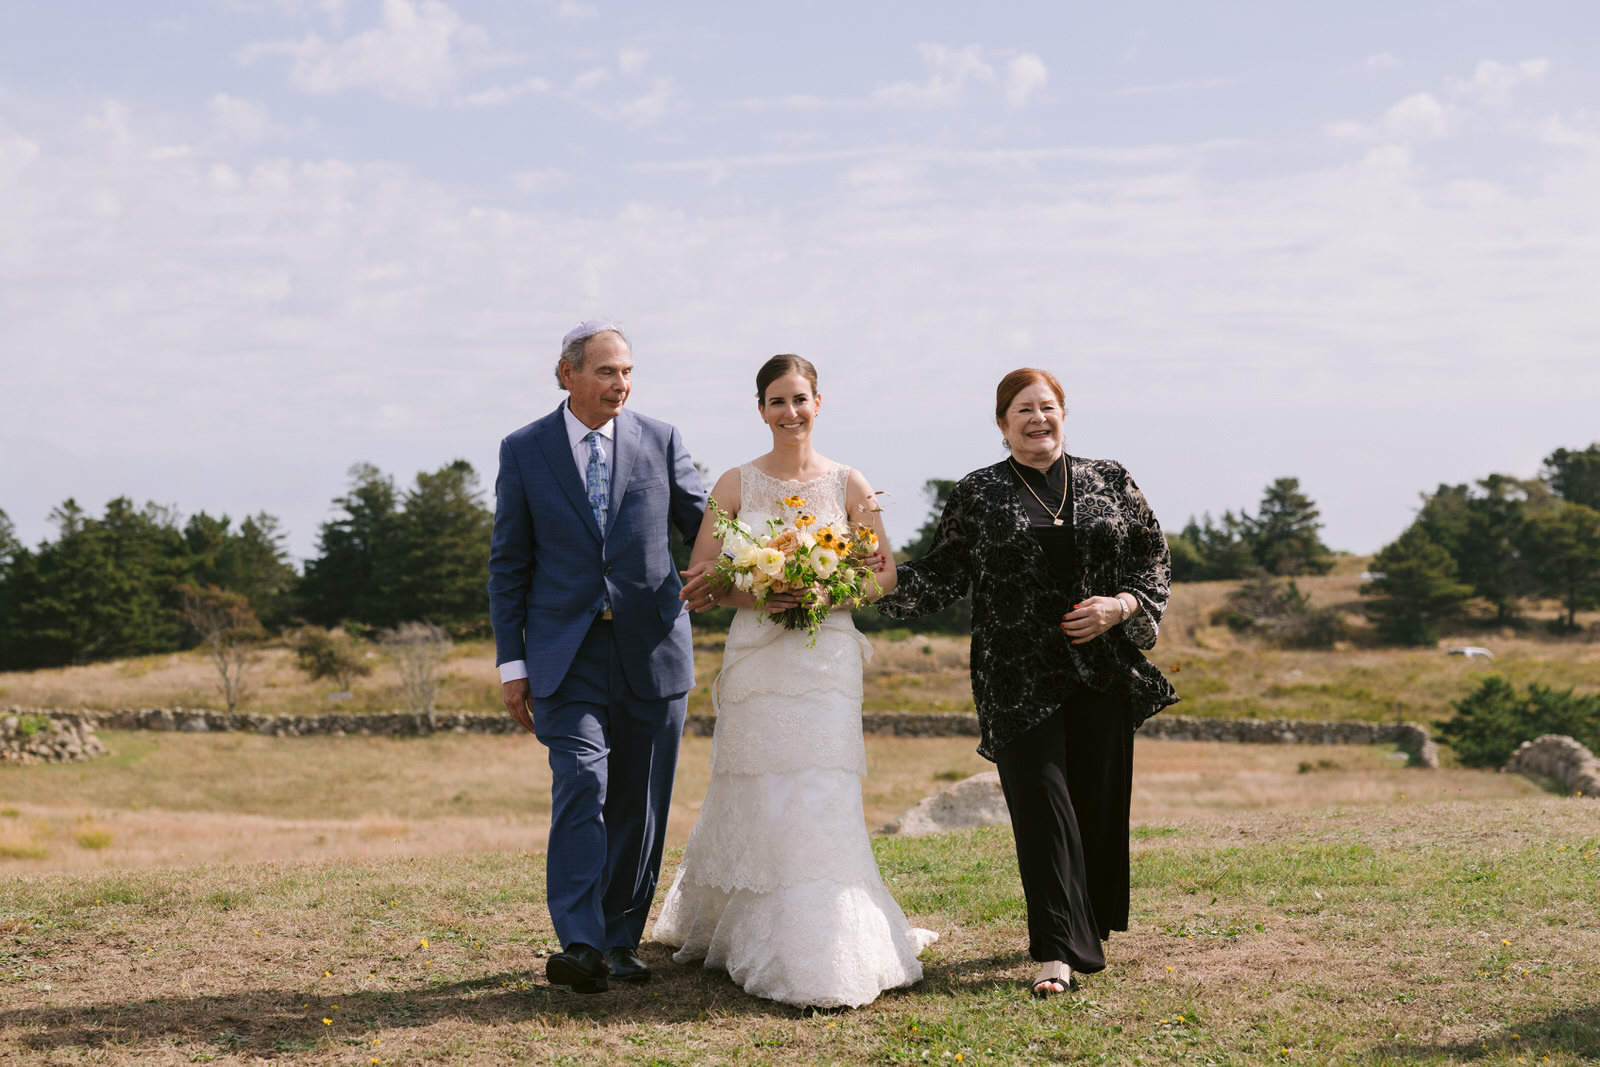 Sarah being walked down the aisle of her wedding with her two parents at her outdoor block island wedding.